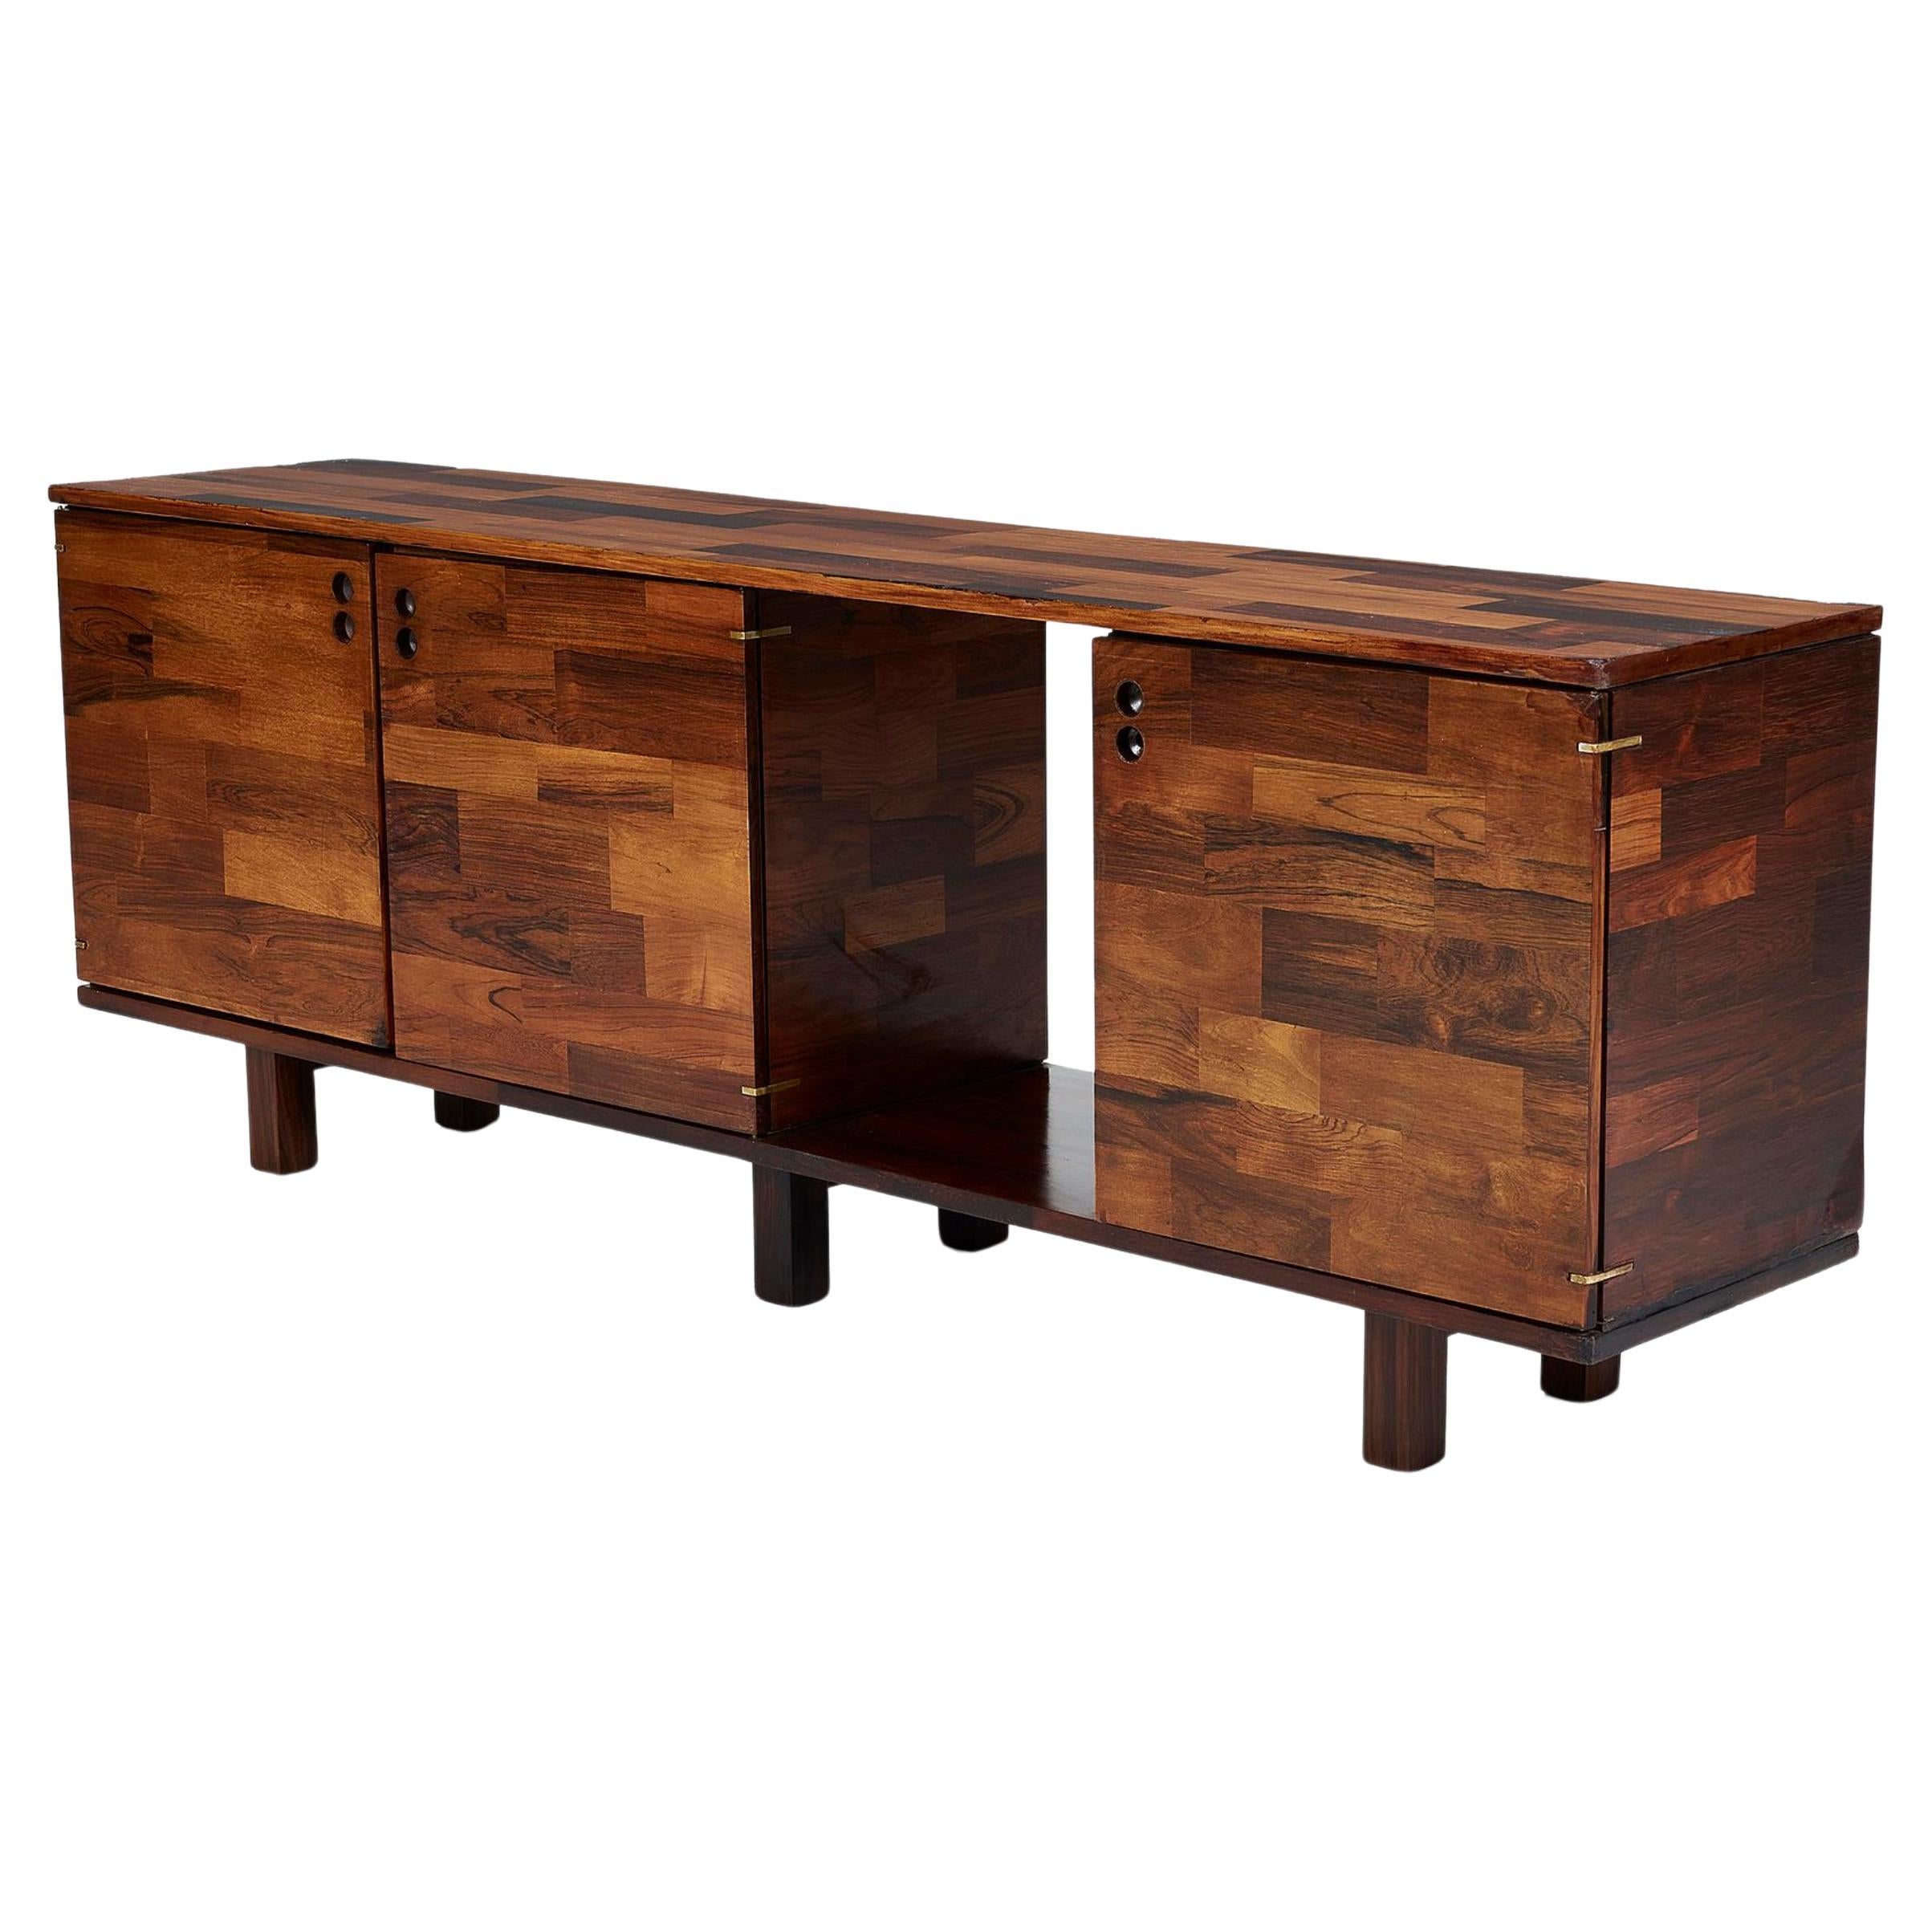 Jorge Zalszupin Rosewood Mid-Century Credenza for L'Atelier, Brazil, 1960s For Sale